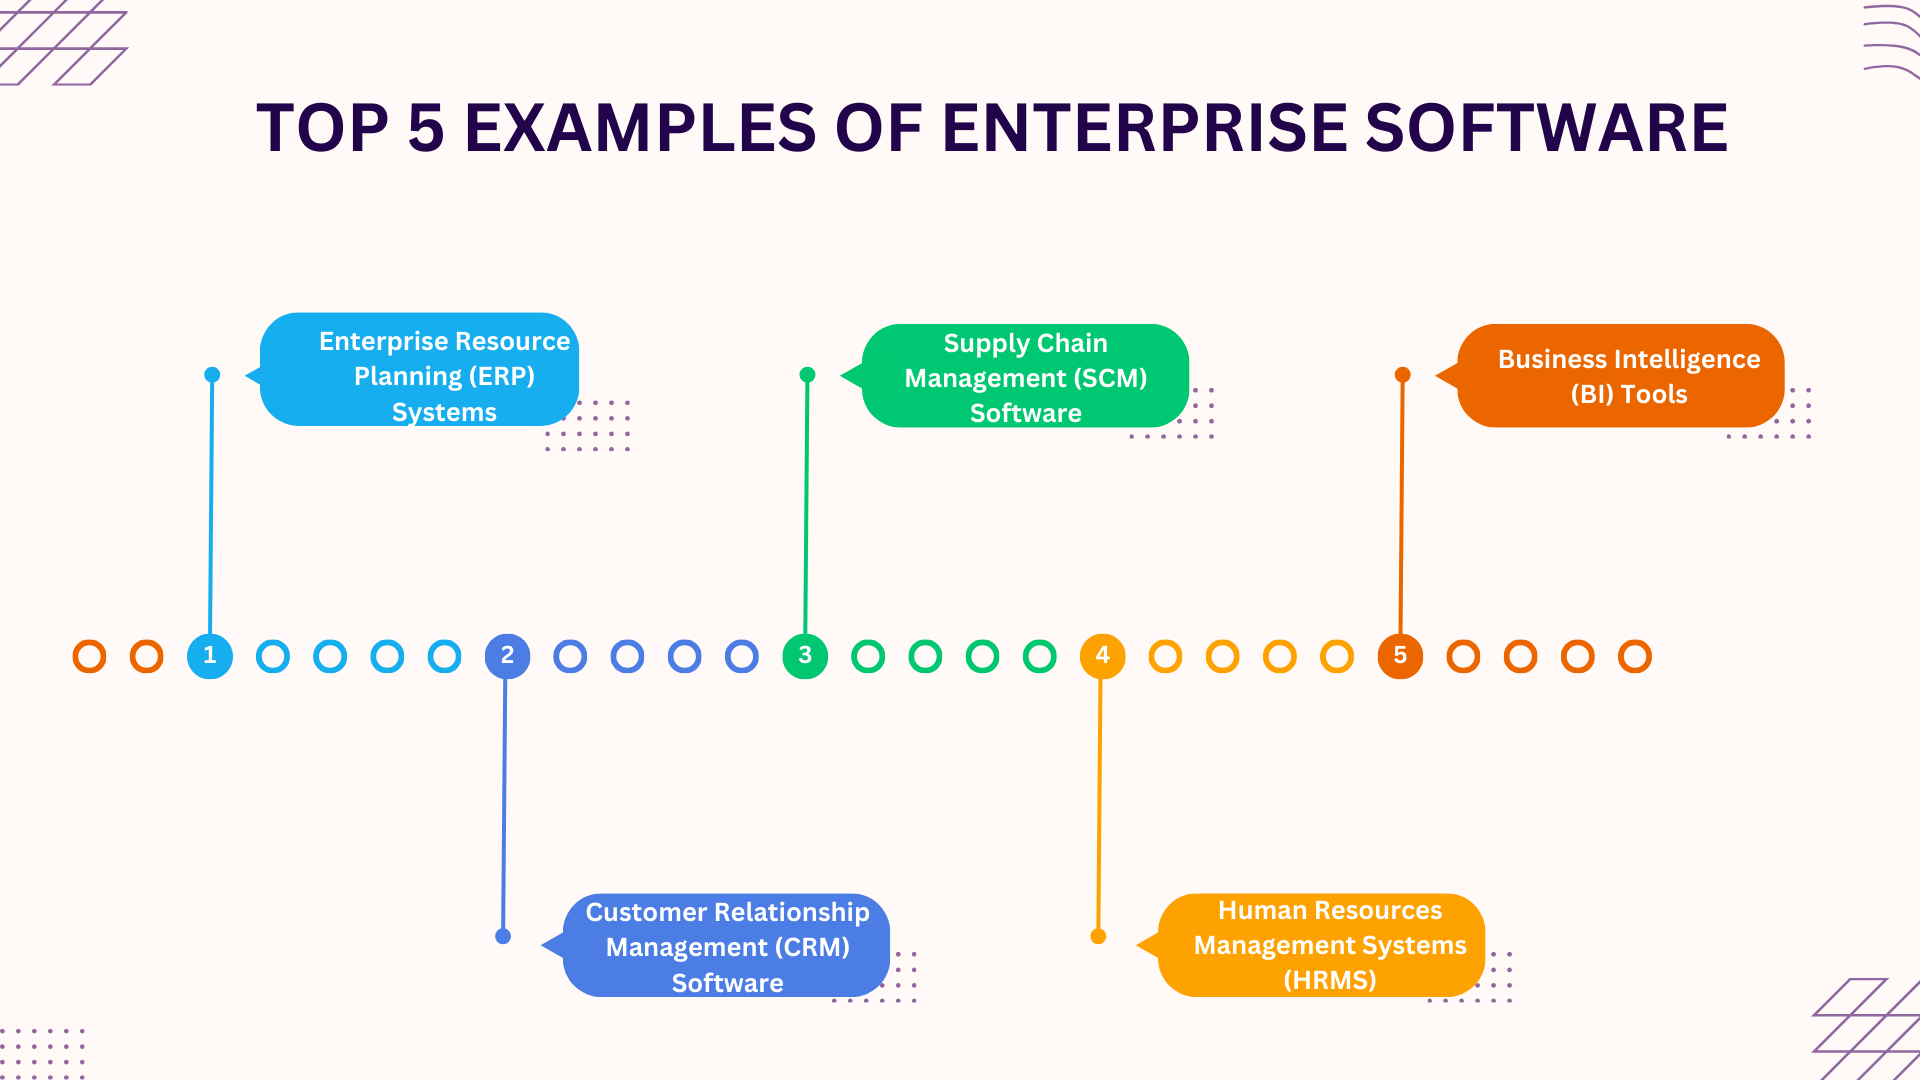 Top 5 Examples of Enterprise Software